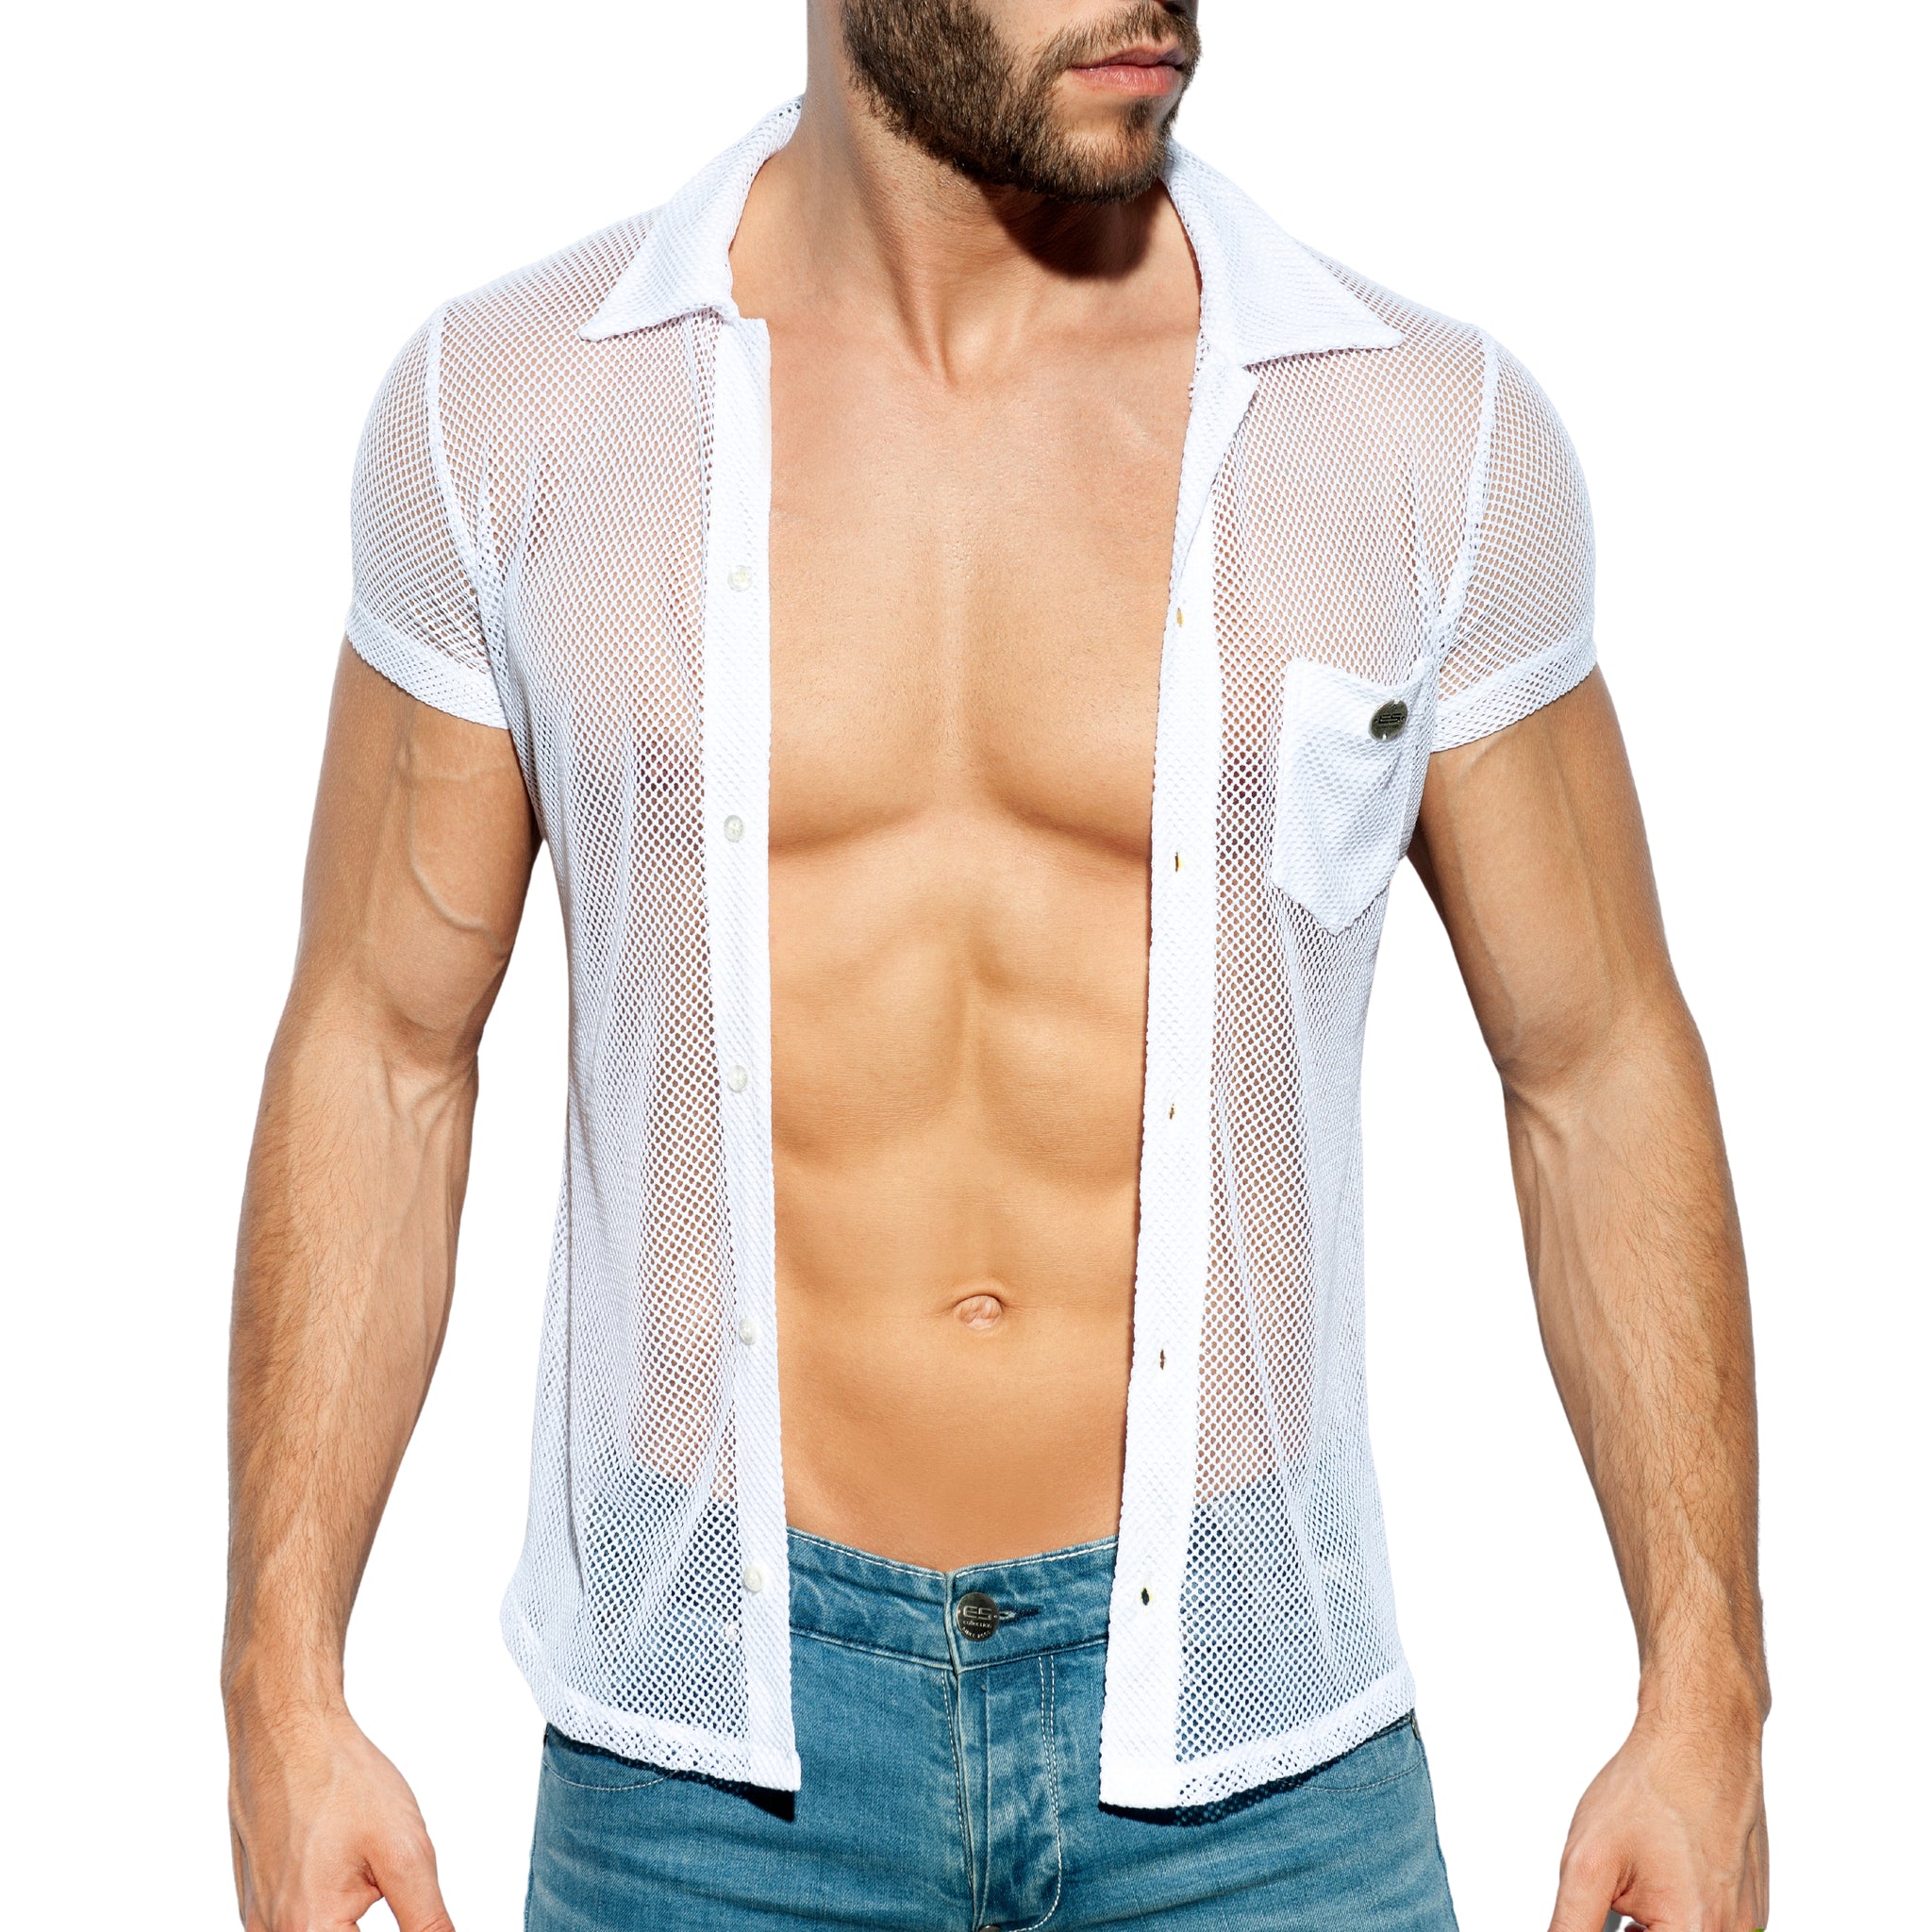 ES Collection Mesh Short Sleeves Shirt White SHT024